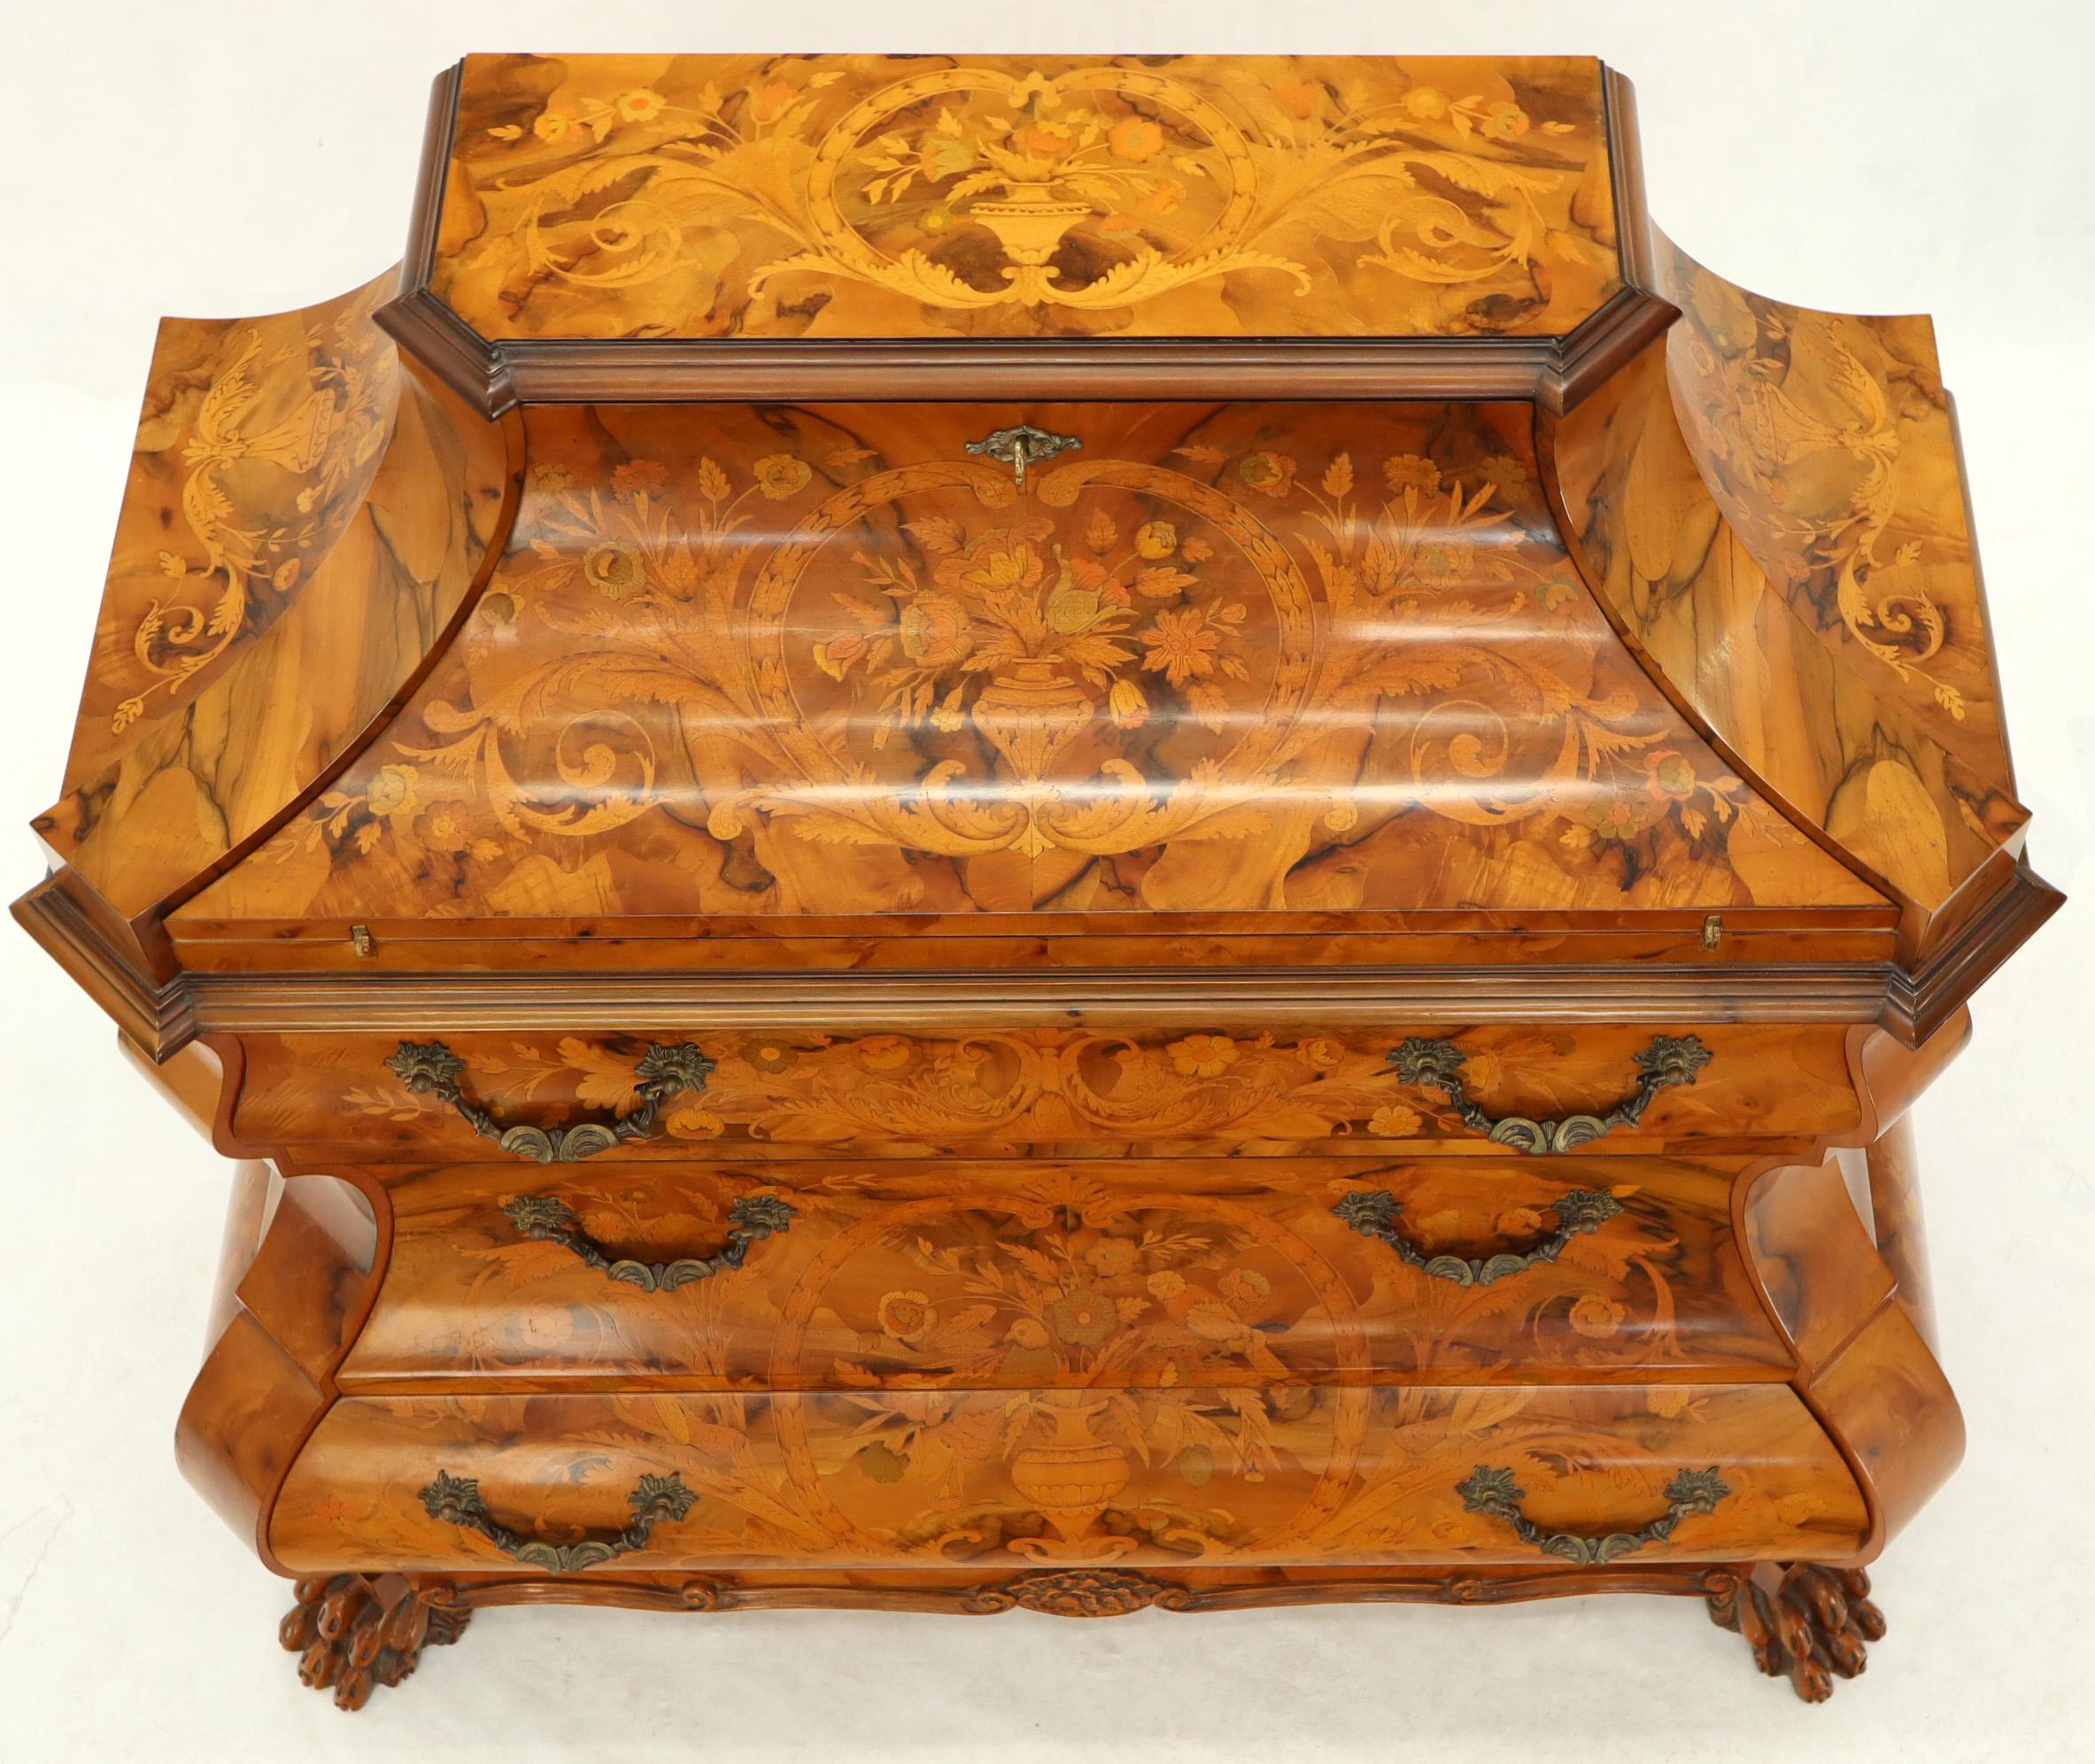 Baroque Revival Italian Bombe Inlay Olive Wood Dresser Drop Front Jewerly Compartment Secretary For Sale